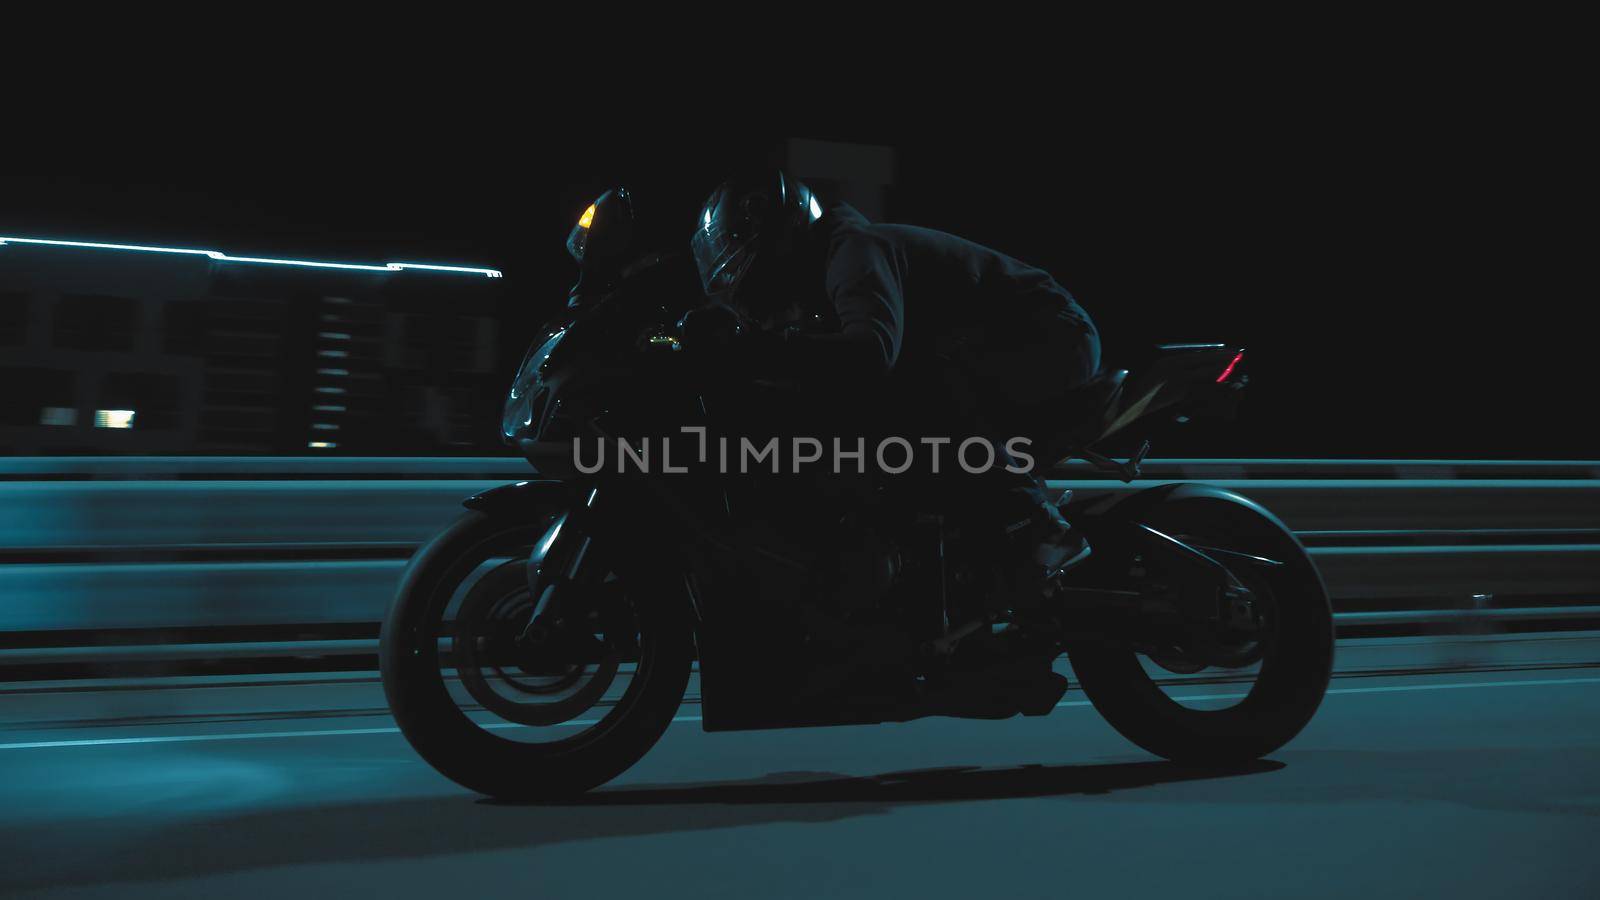 A man rides a sports motorcycle through the city at night by studiodav